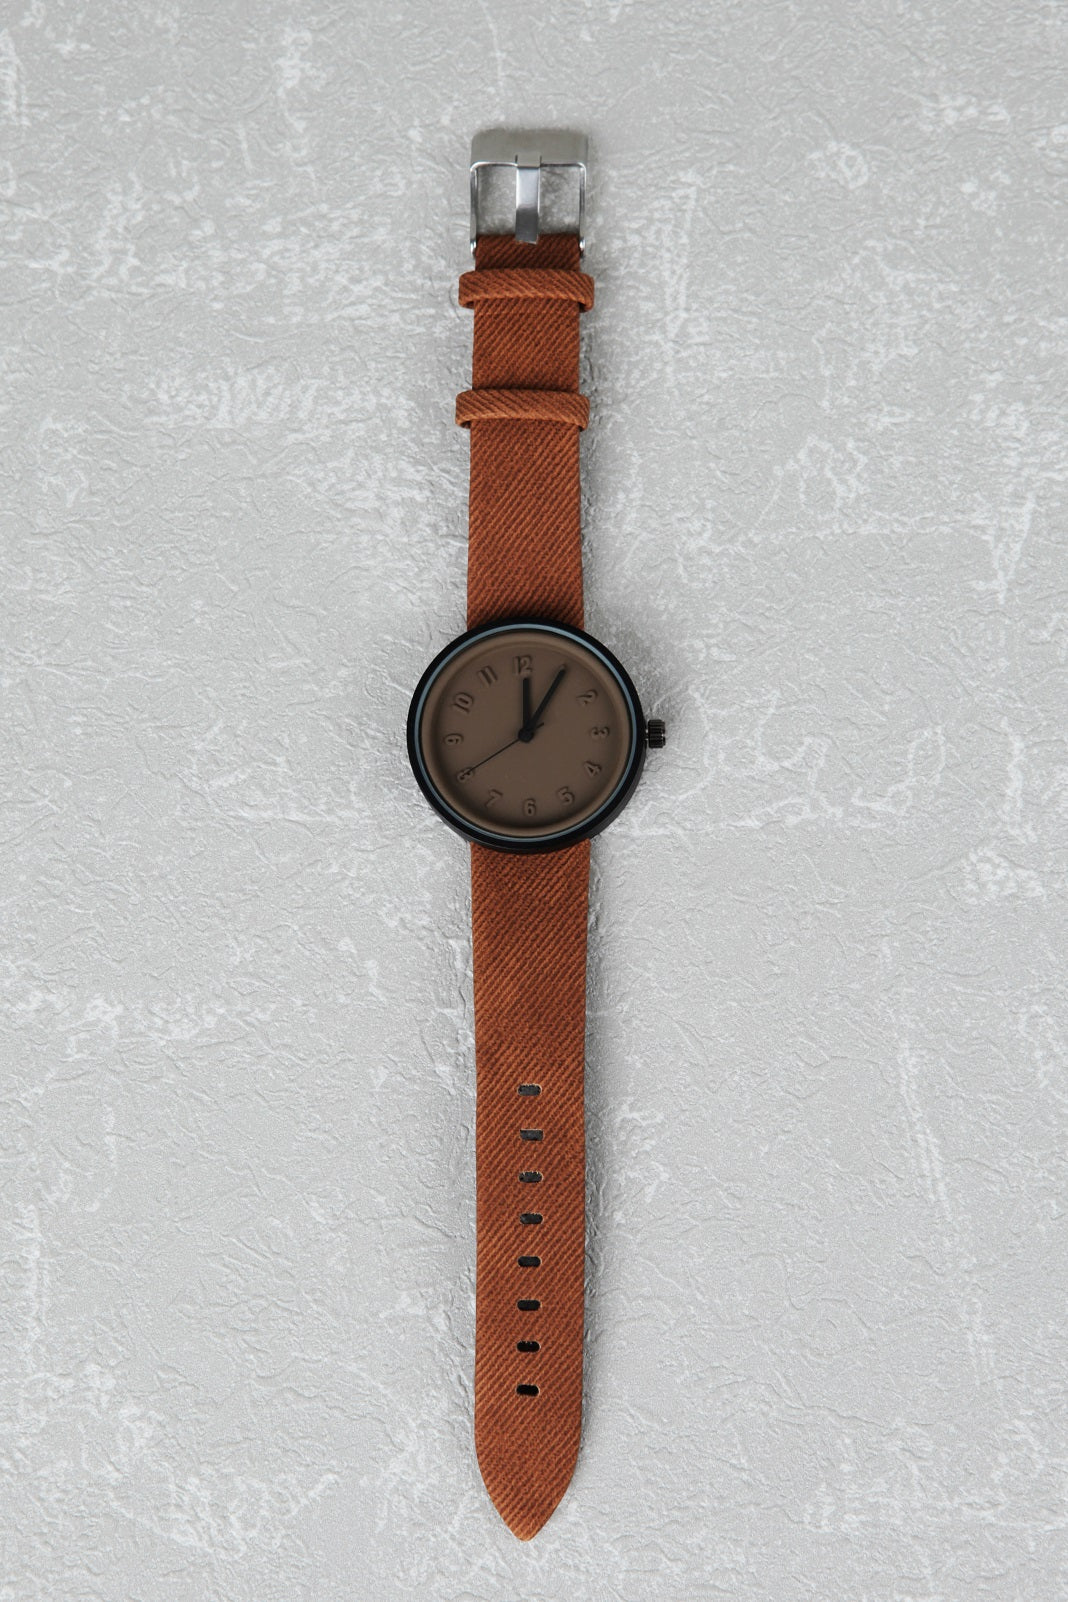 ANDREW SMITH - WATCH (BROWN)